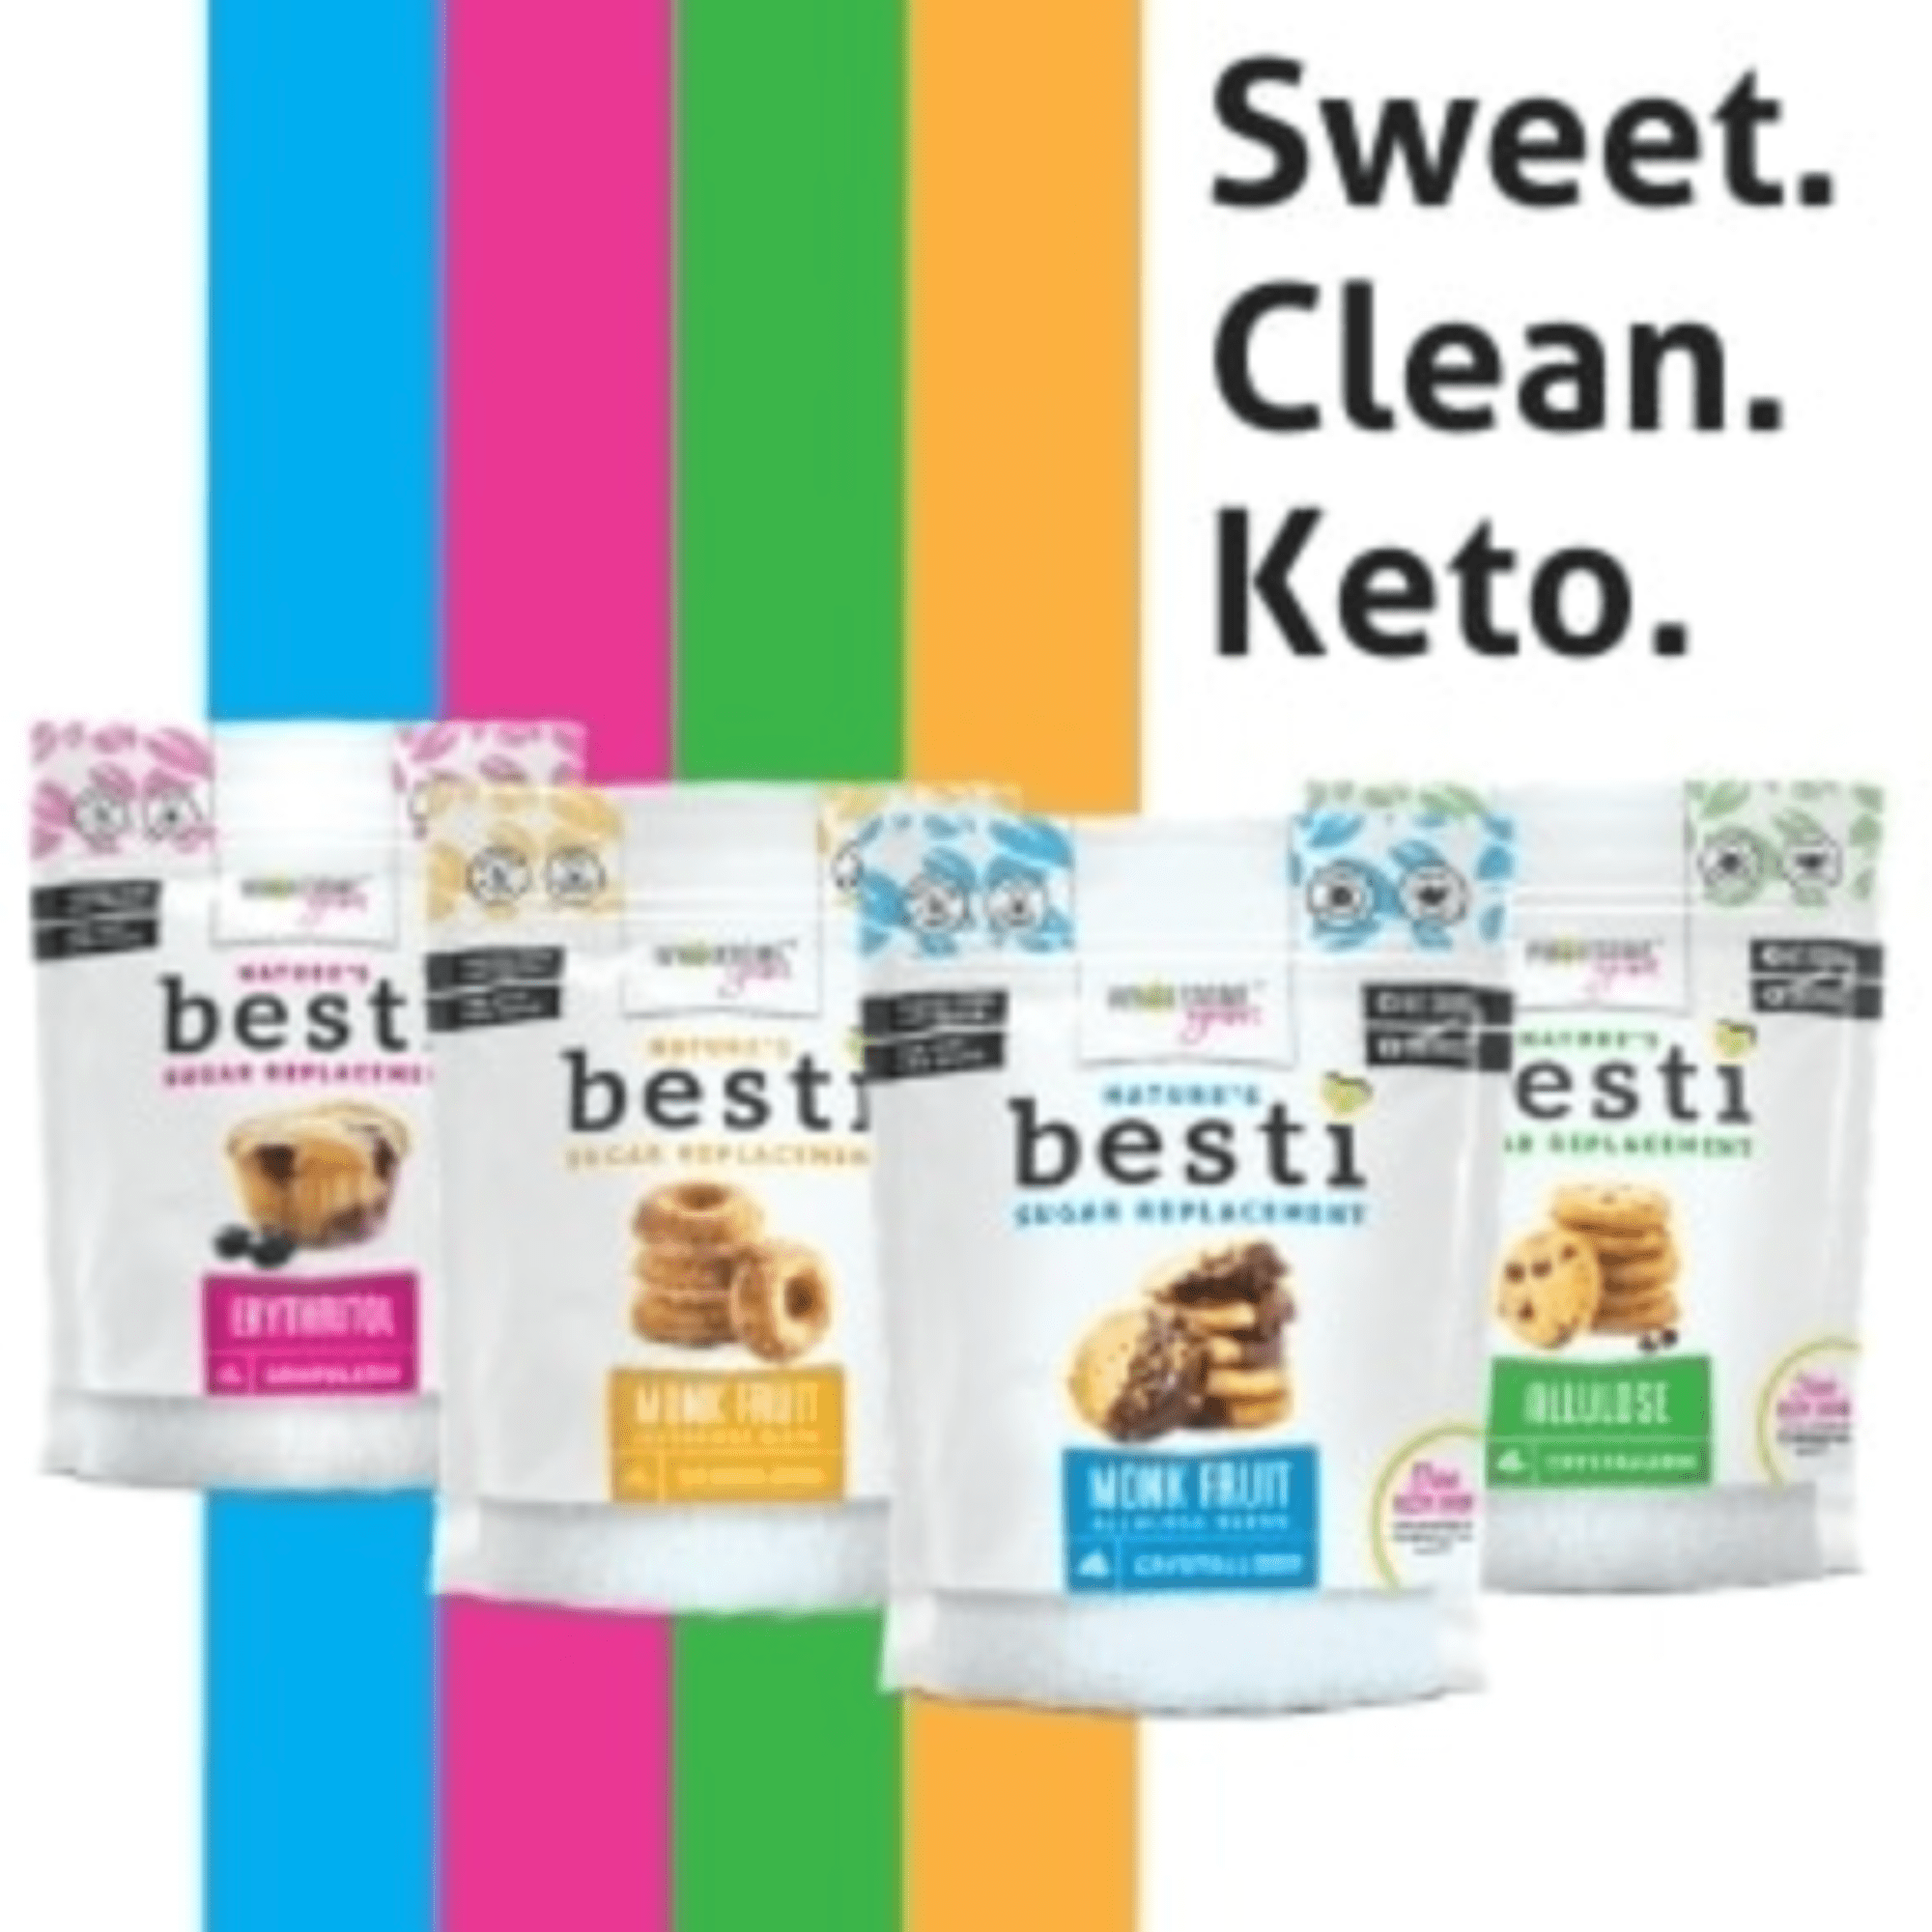 besti products discount